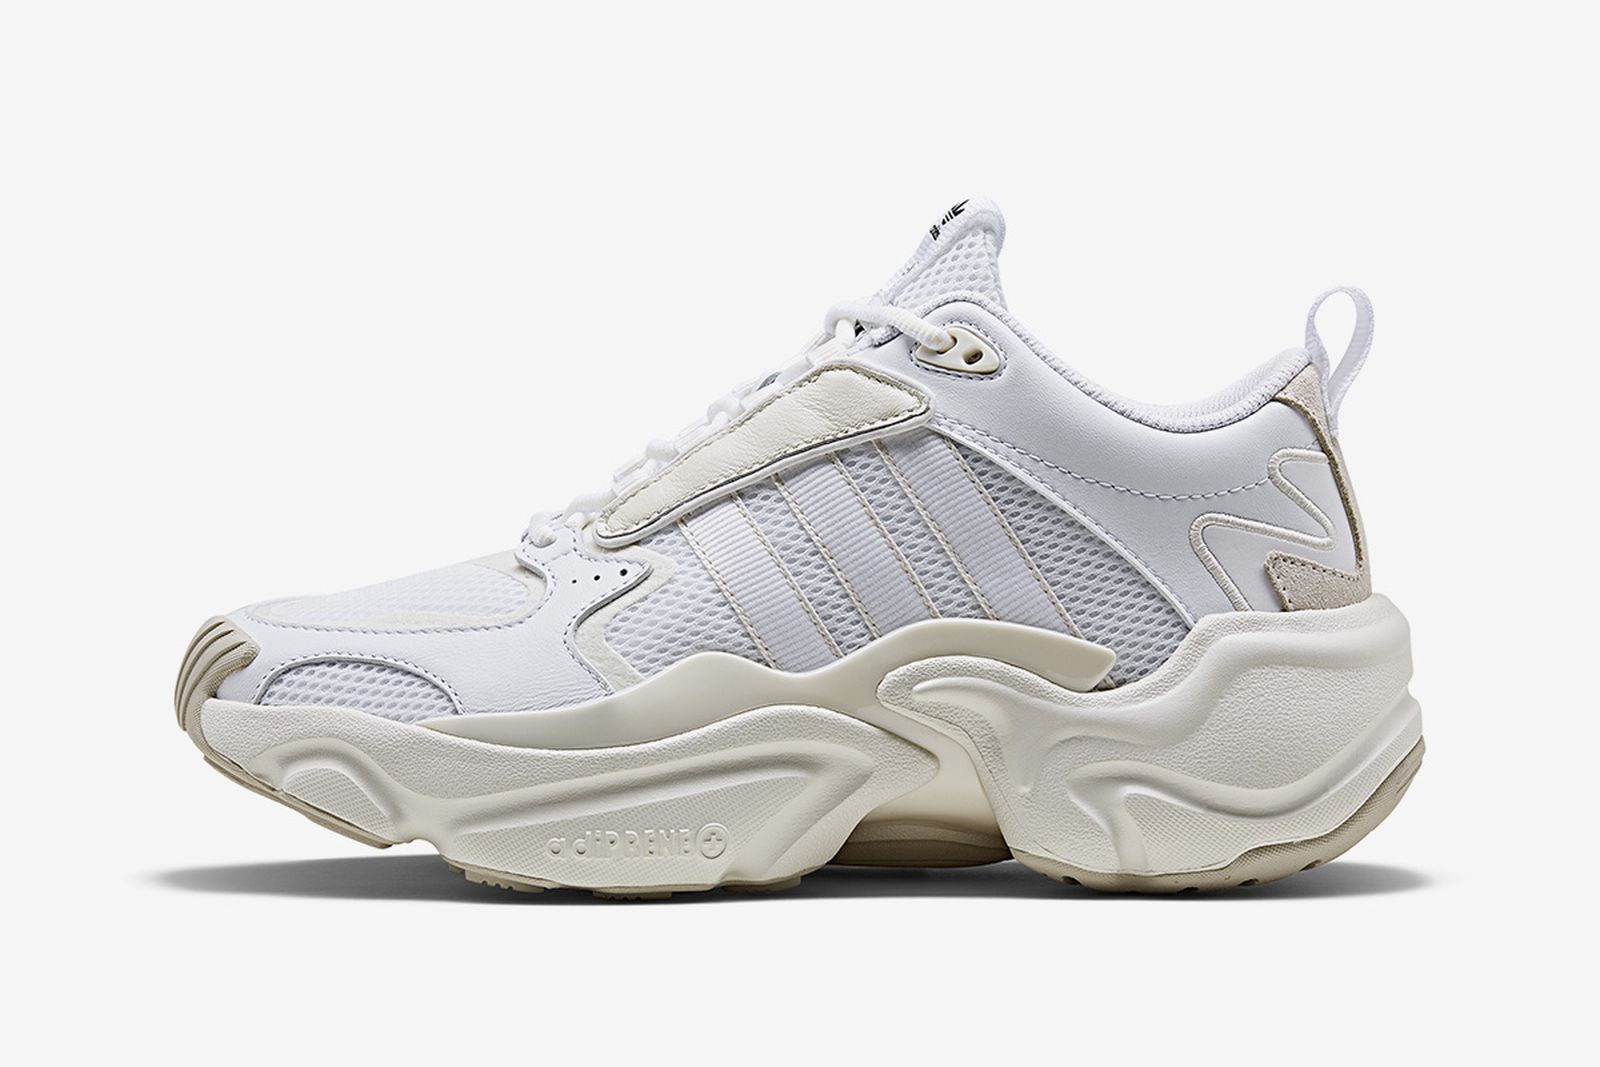 Naked x adidas Magmur Runner: Where to Buy Today